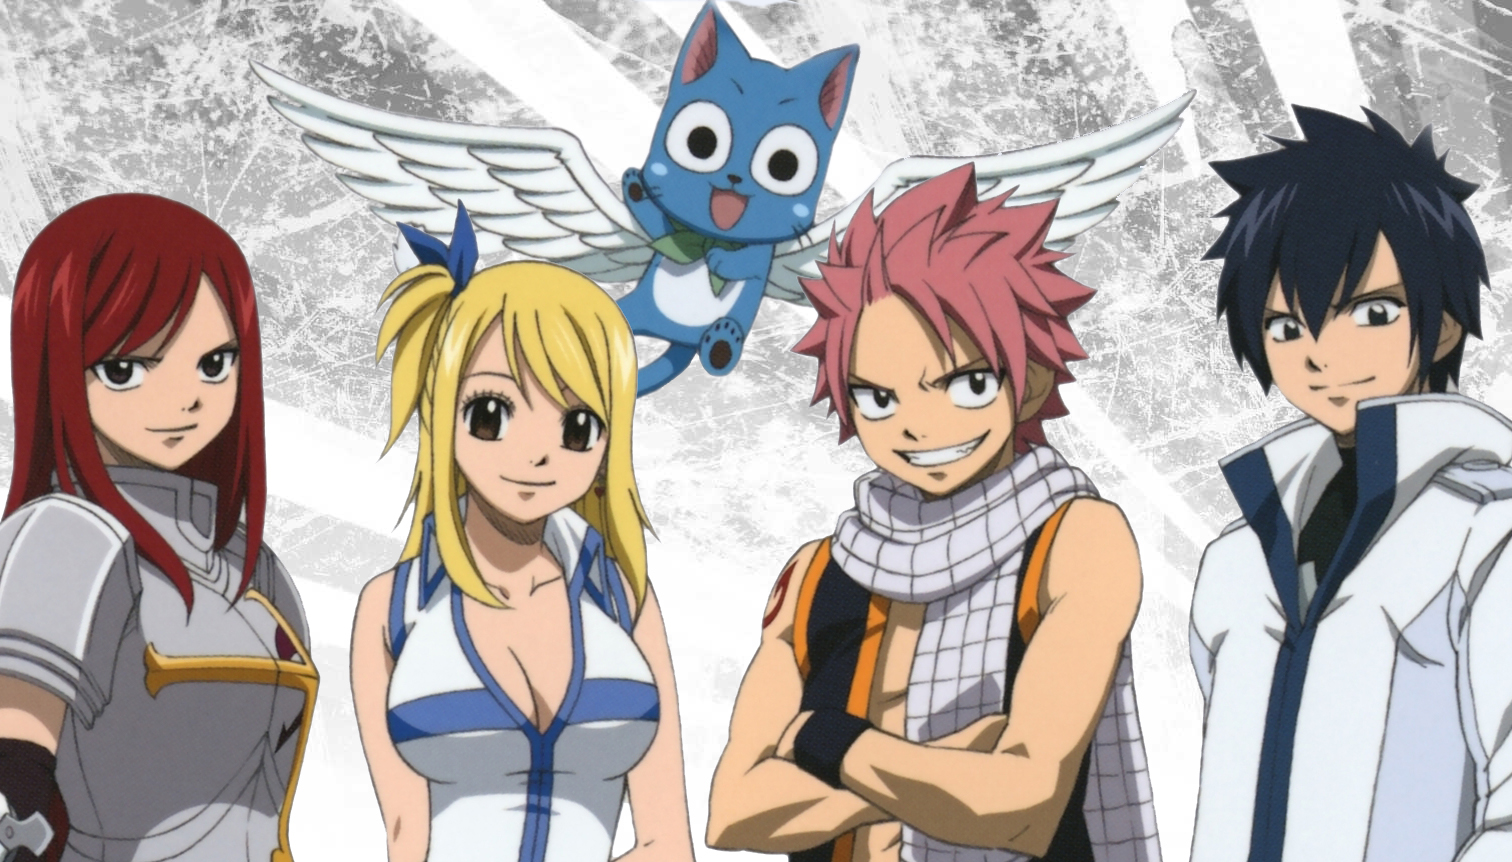 Nice Images Collection: Fairy Tail Desktop Wallpapers